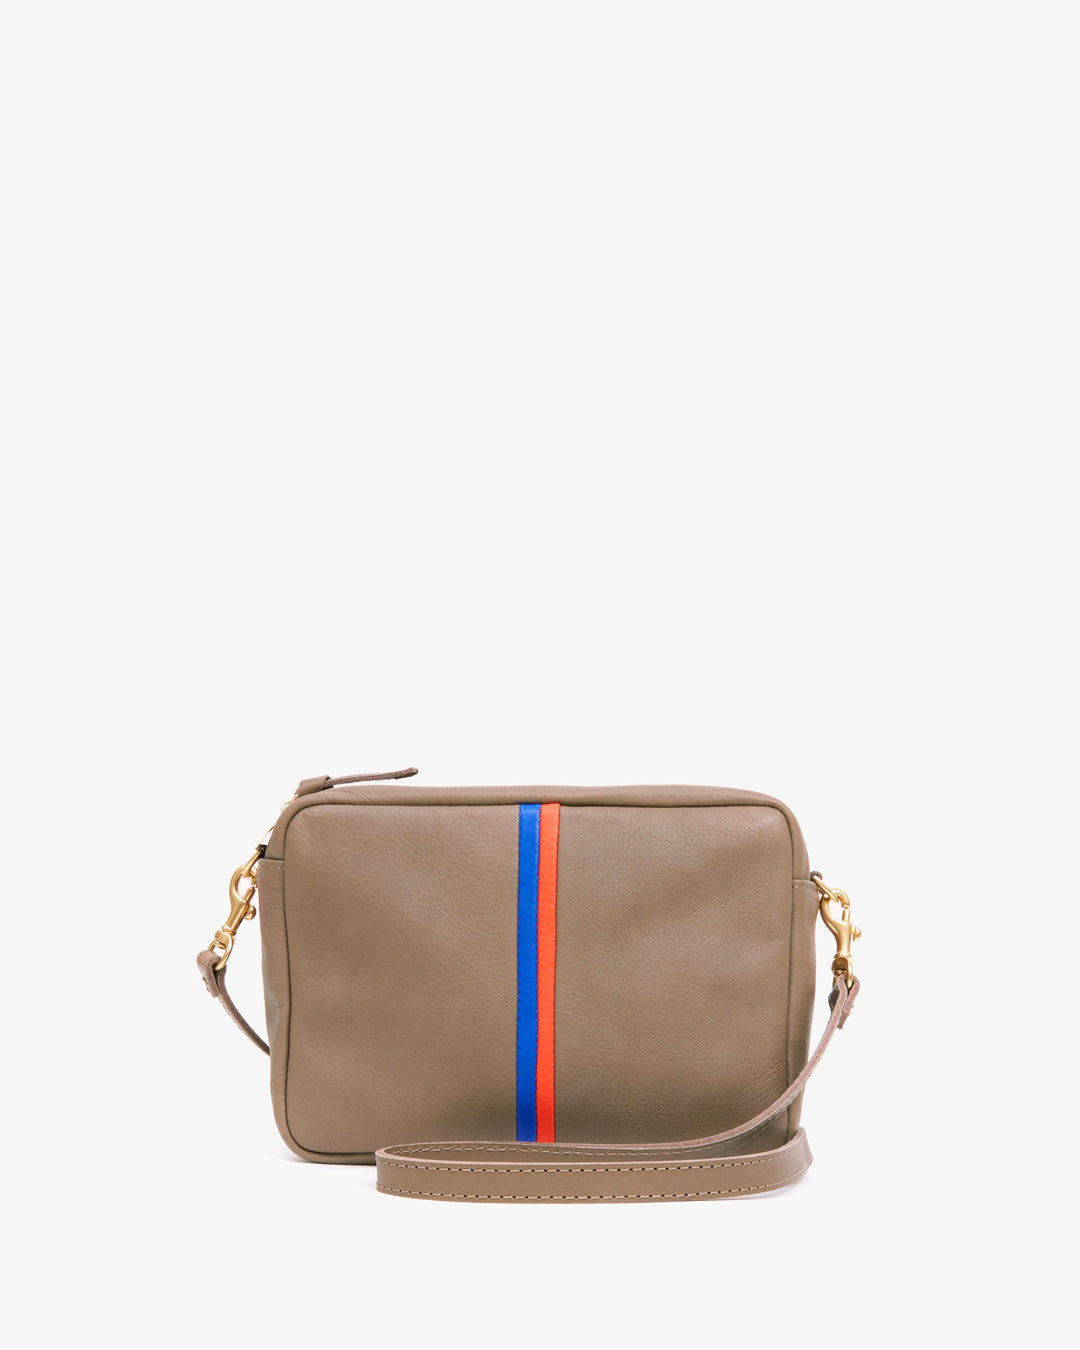 Clare V | Midi Sac: Taupe Mousse with Stripes